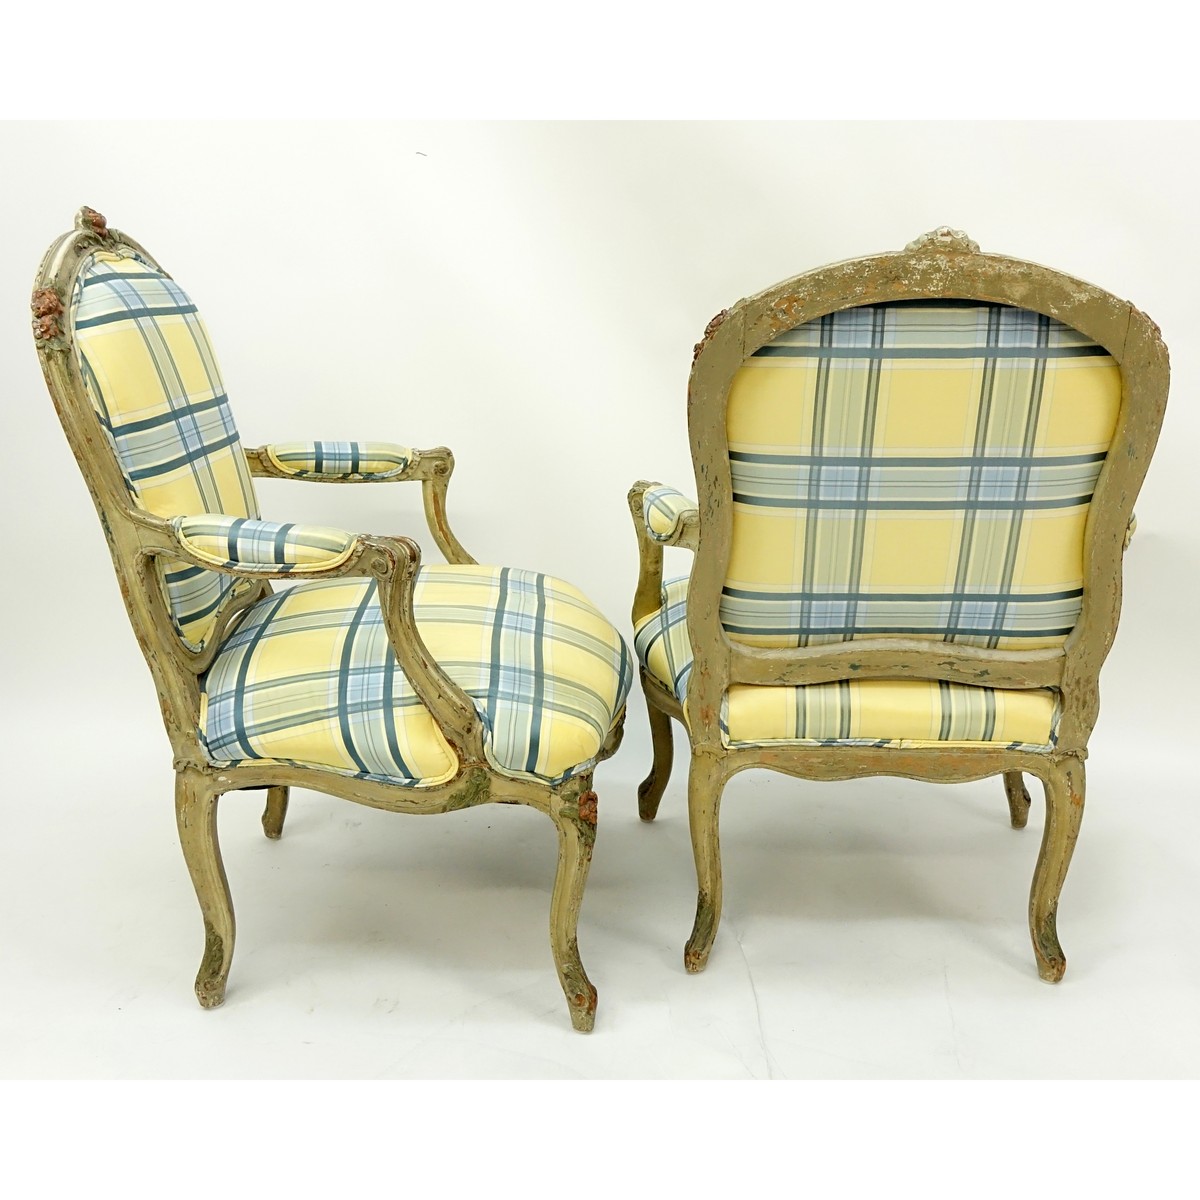 Pair of 18/19th Century French Carved Wood and Upholstered Fauteuils. Painted floral accents to frame, stands on cabriole legs.